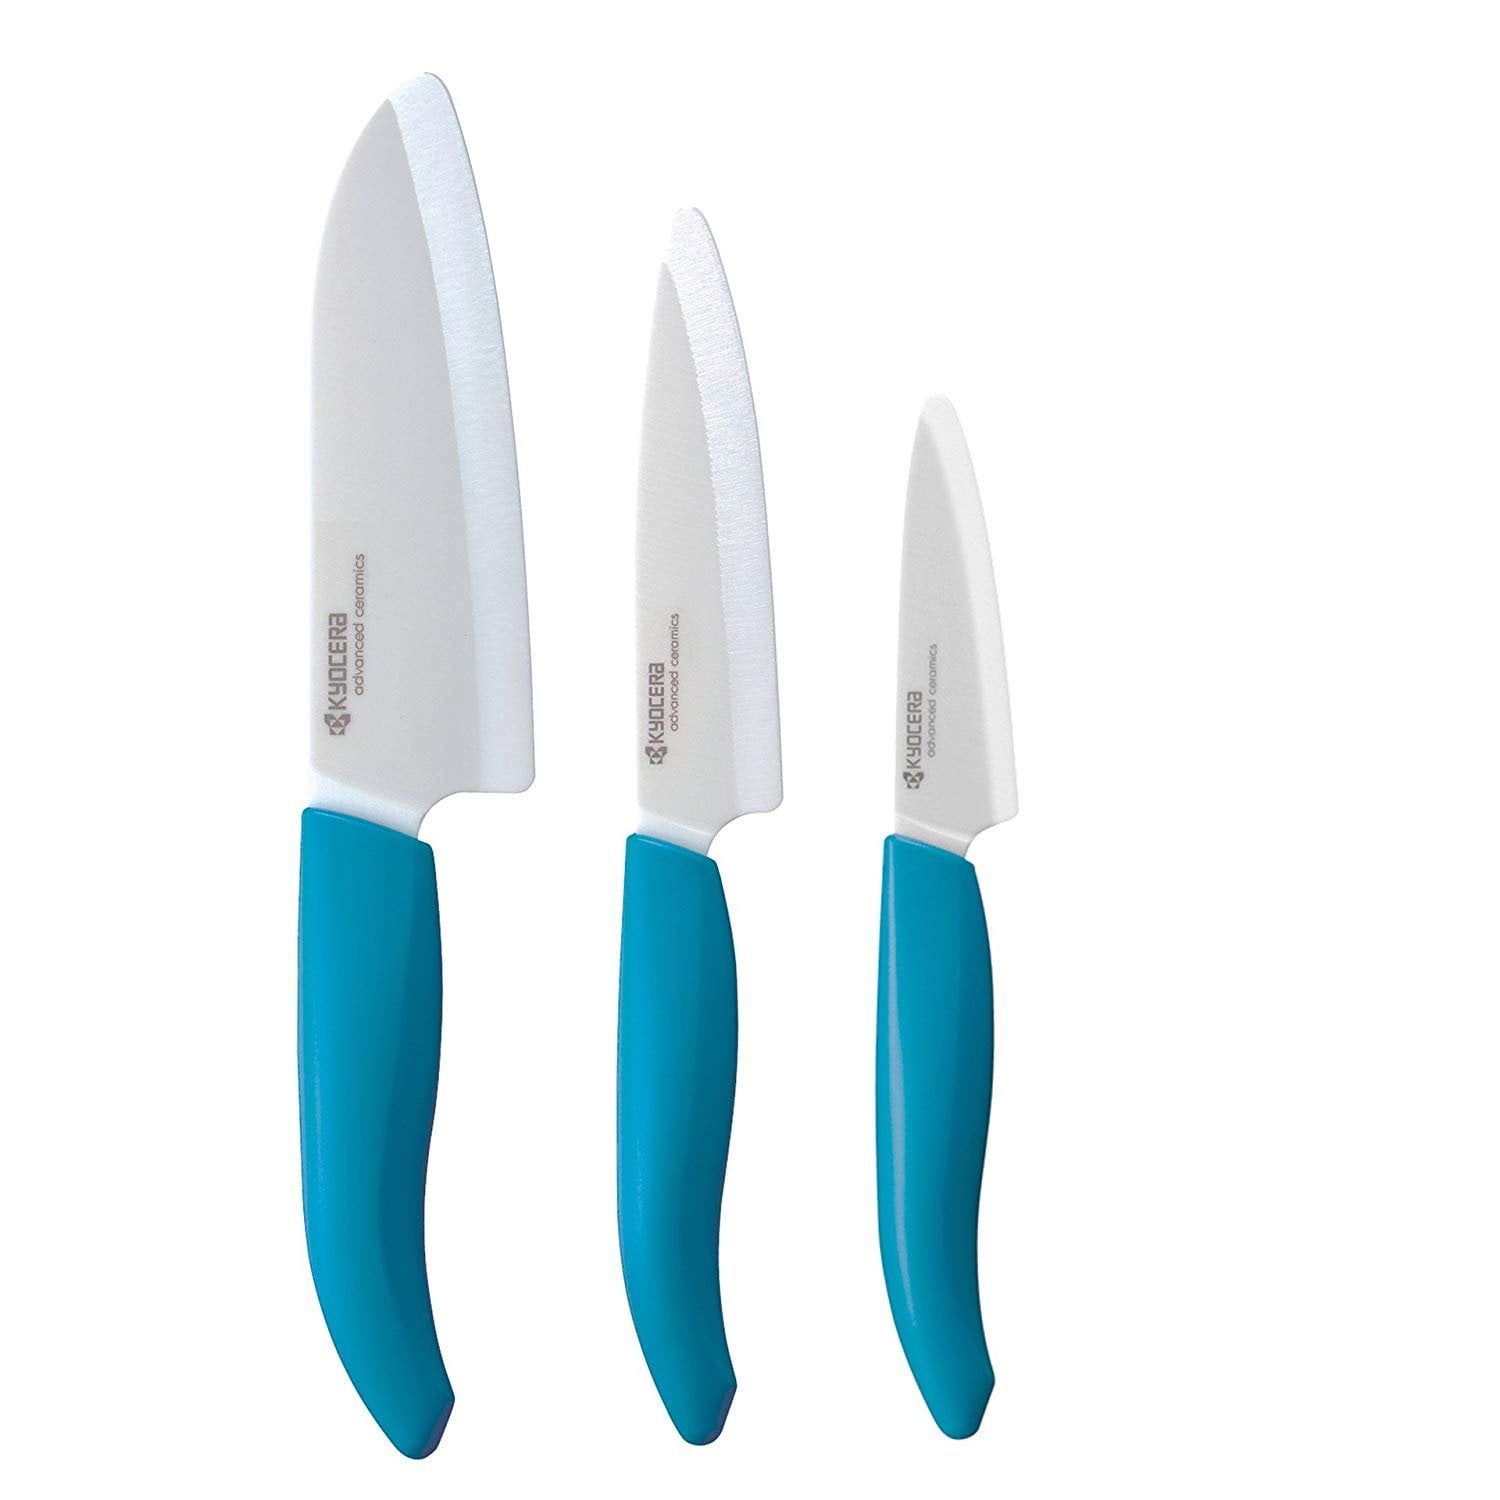 KYOCERA > Our most innovative ceramic knife, it will become your favorite  in the kitchen.